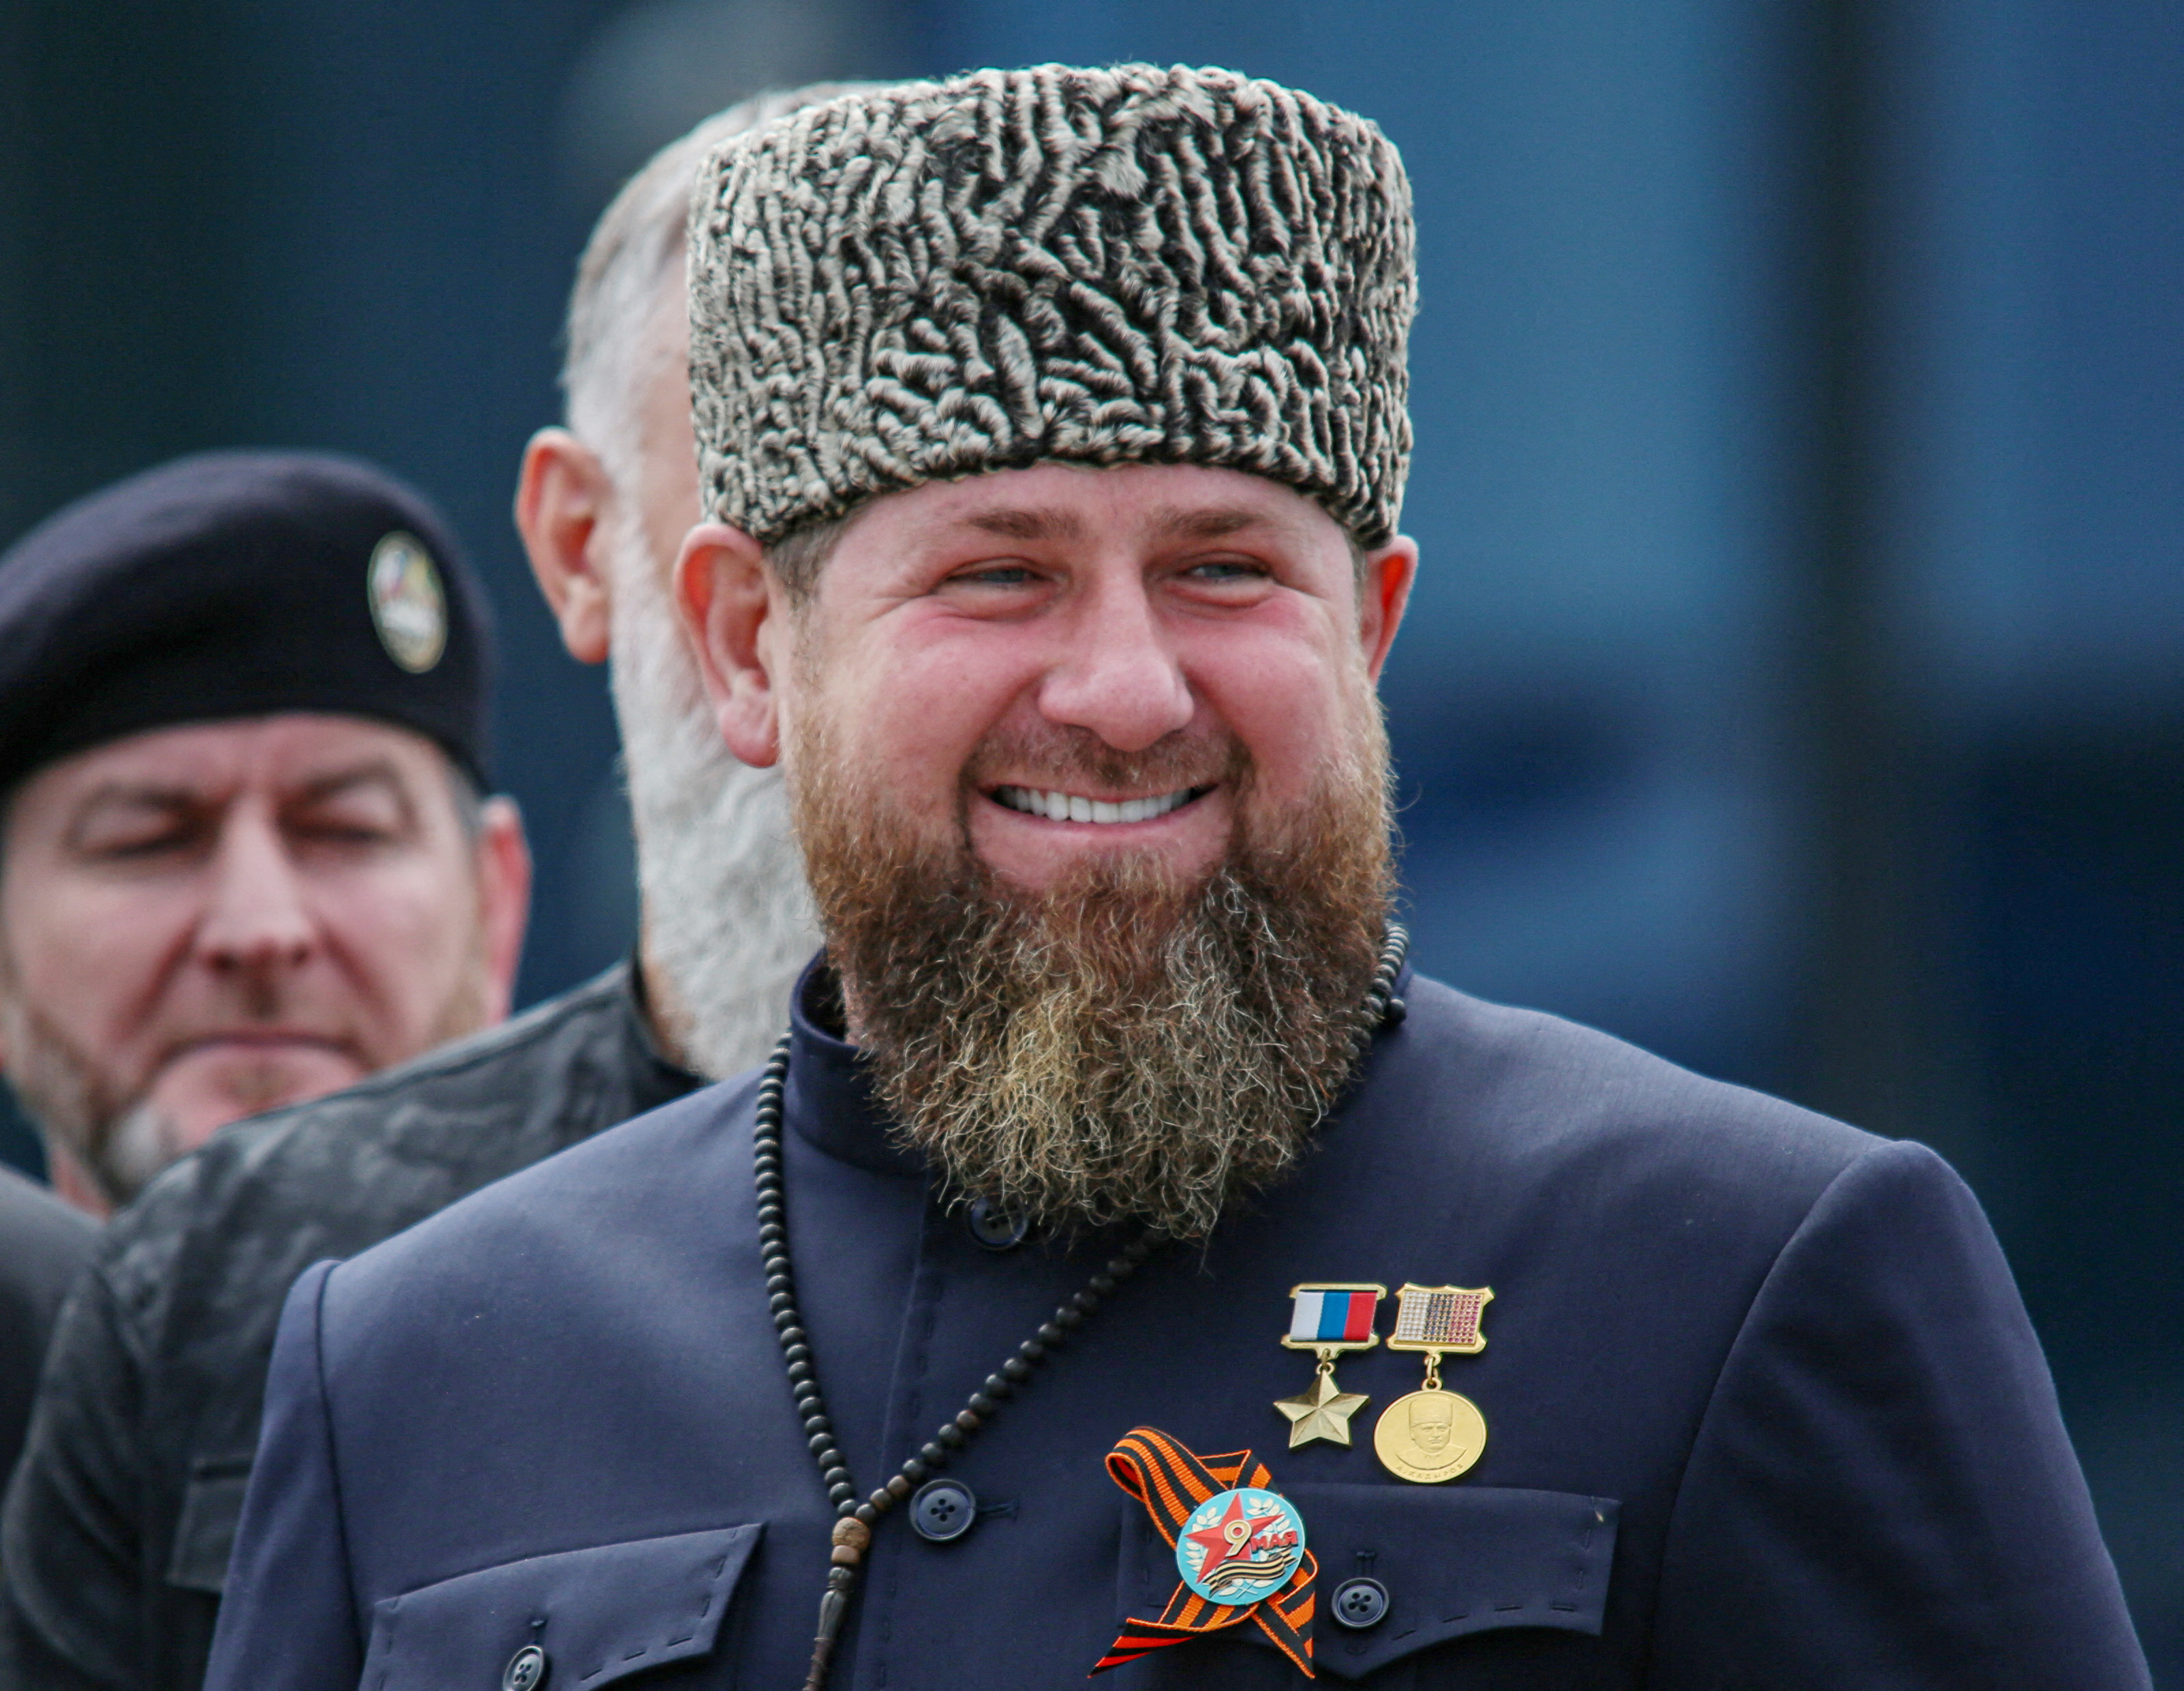 Russia Claims It Has No Data to Disclose With regards to Well being Speculations Surrounding Ramzan Kadyrov | News on Russia-Ukraine Conflict